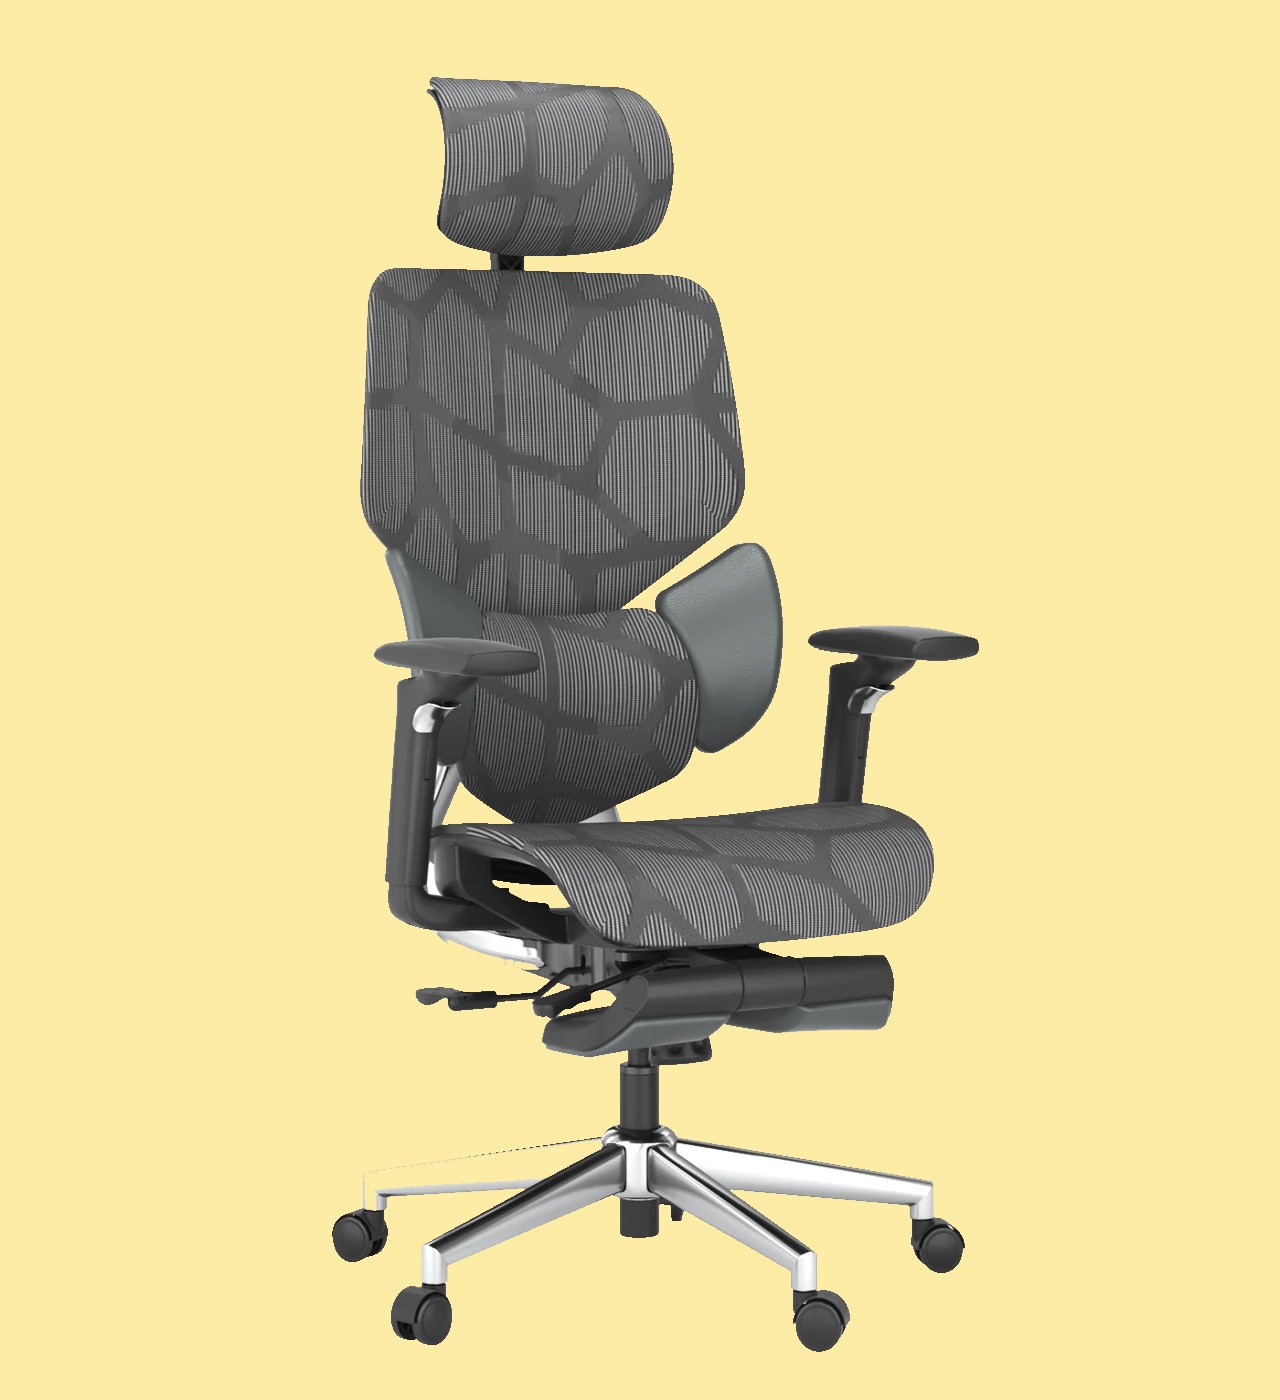 The depth of the cushion can be adjusted on the Hbada Ergonomic Chair, one of the ideal chairs for recording studio.